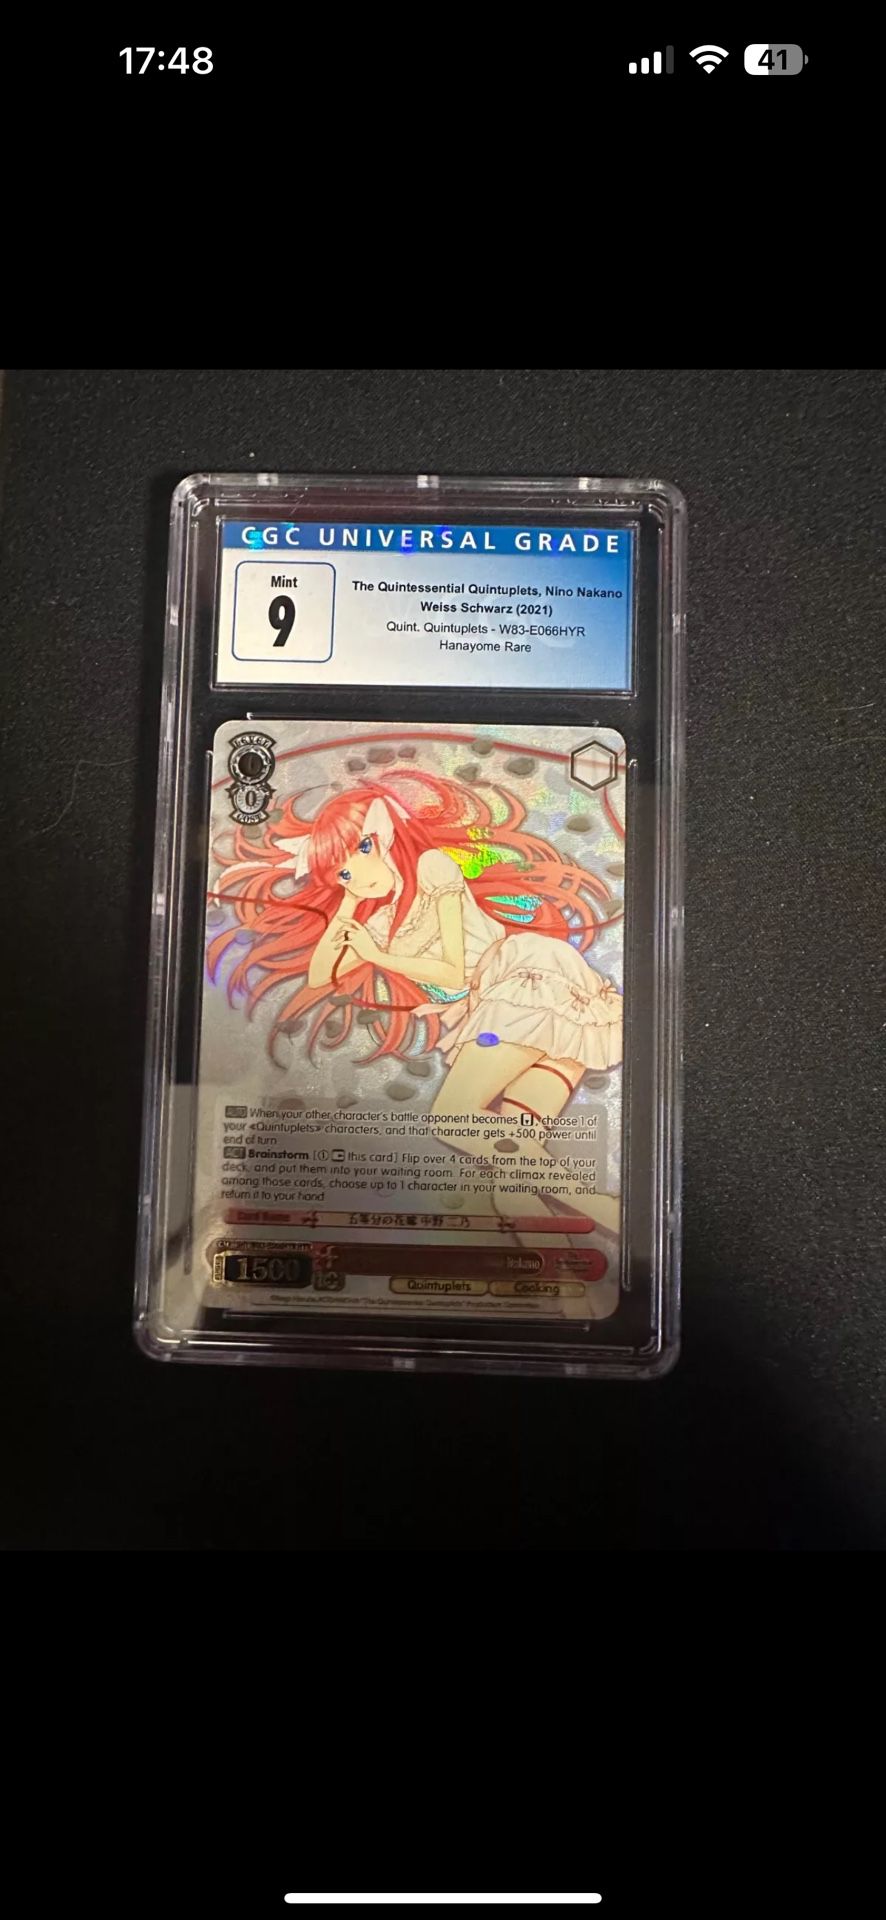 Weiss Schwarz BGS 9 The Quintessential Quintuplets, Nino Nakano HYR 5HY/W83